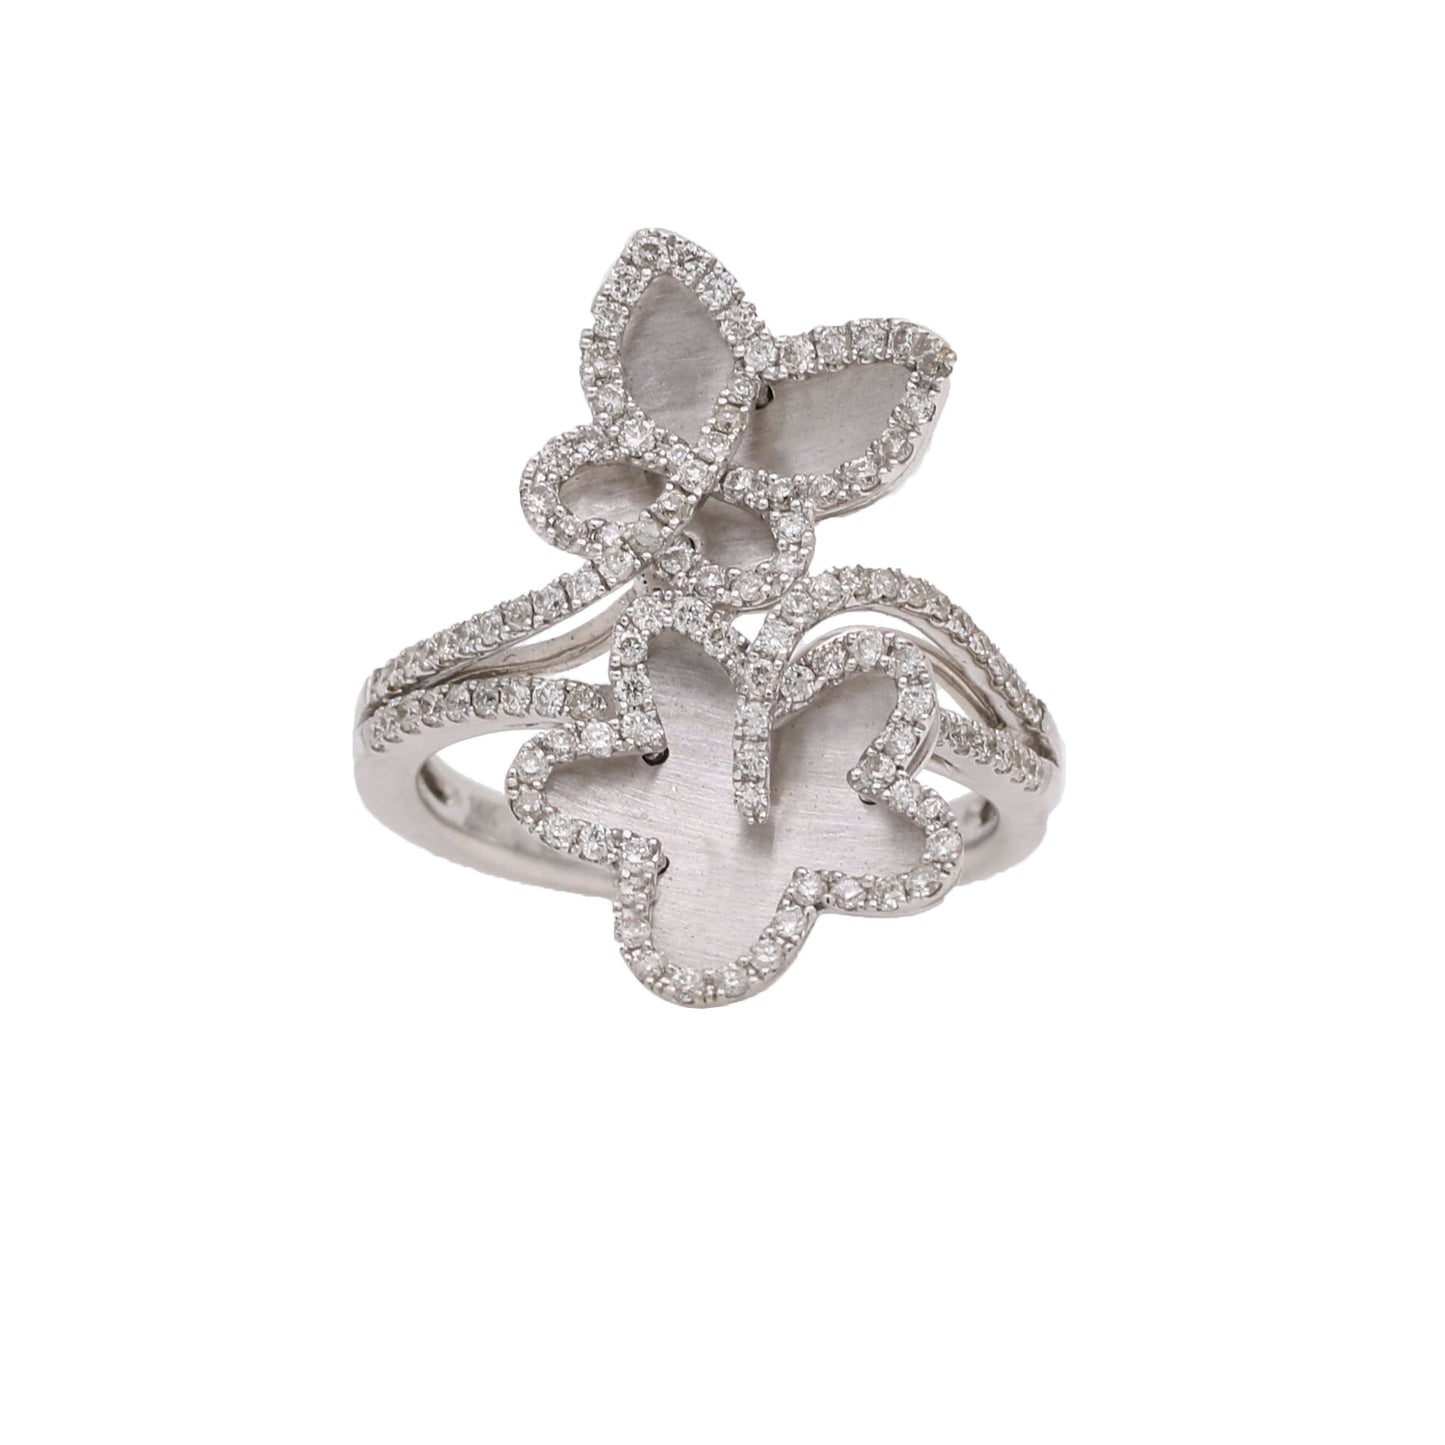 Enchanting Butterfly Flower Bypass Diamond Statement Ring in 14k White Gold